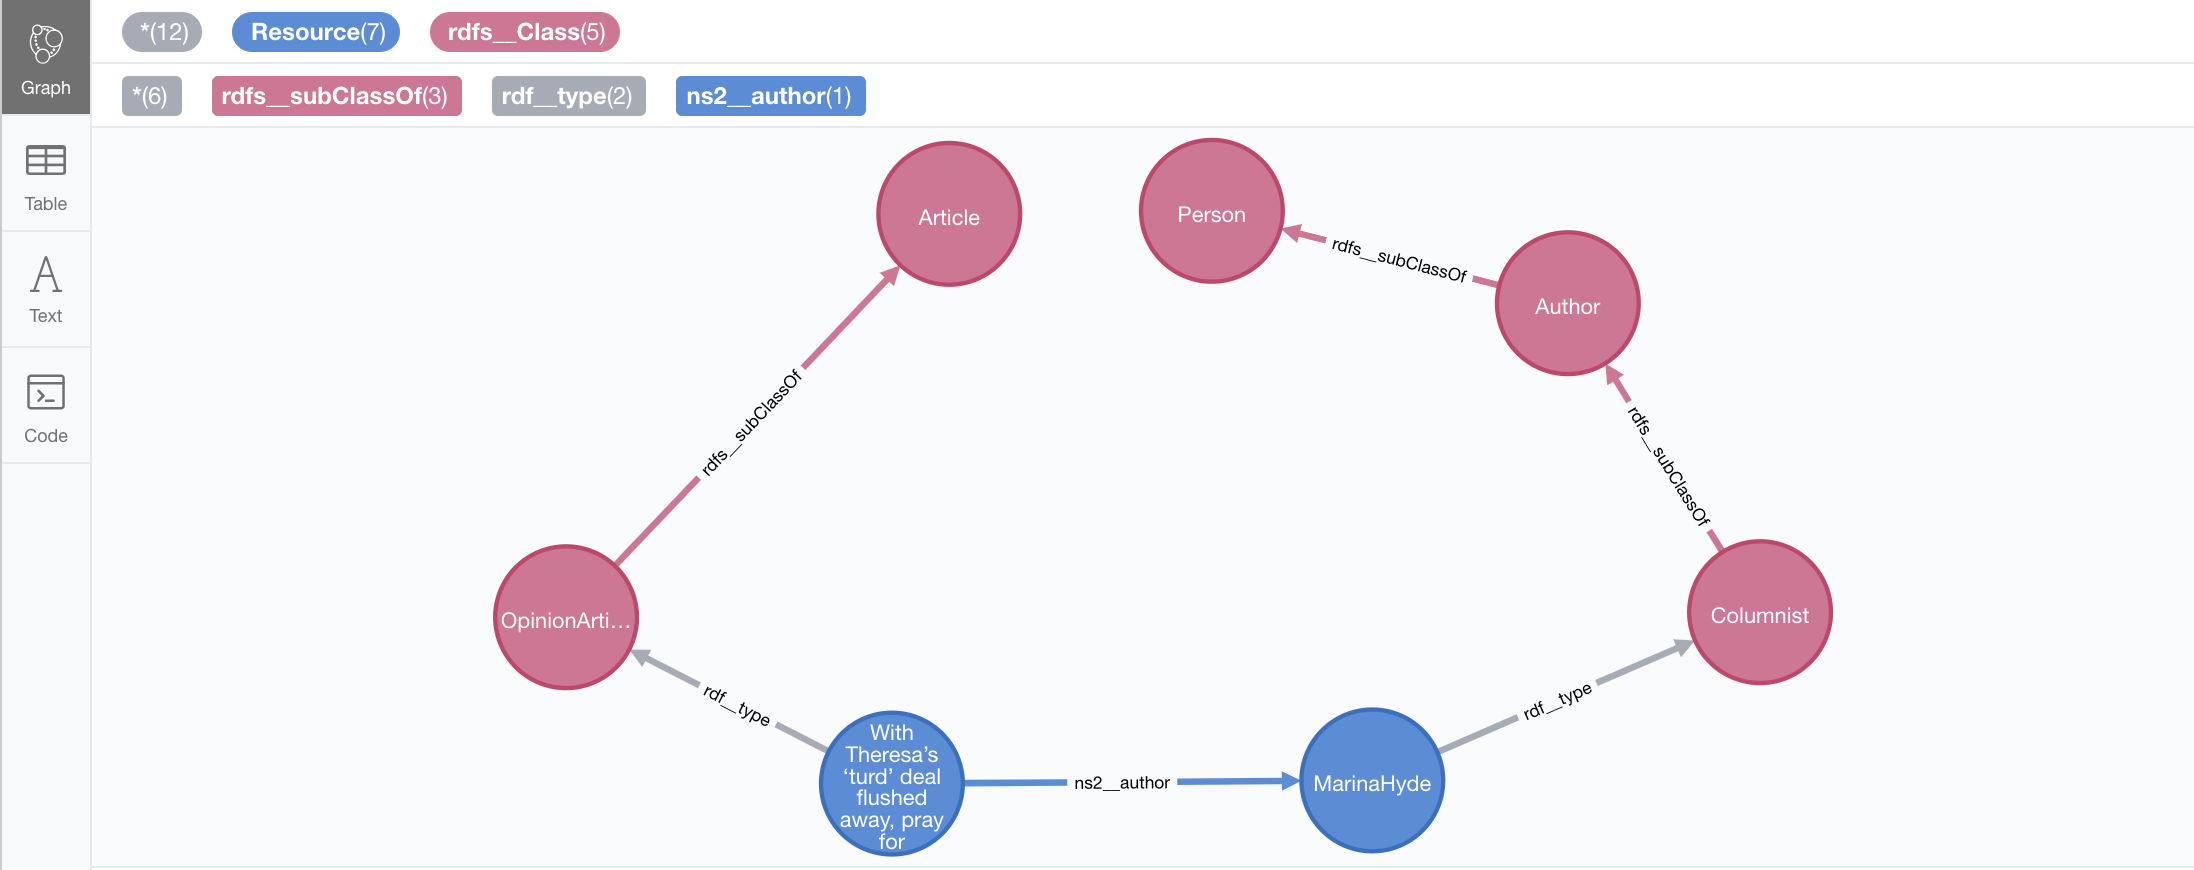 Connected ontology and instance data imported in Neo4j